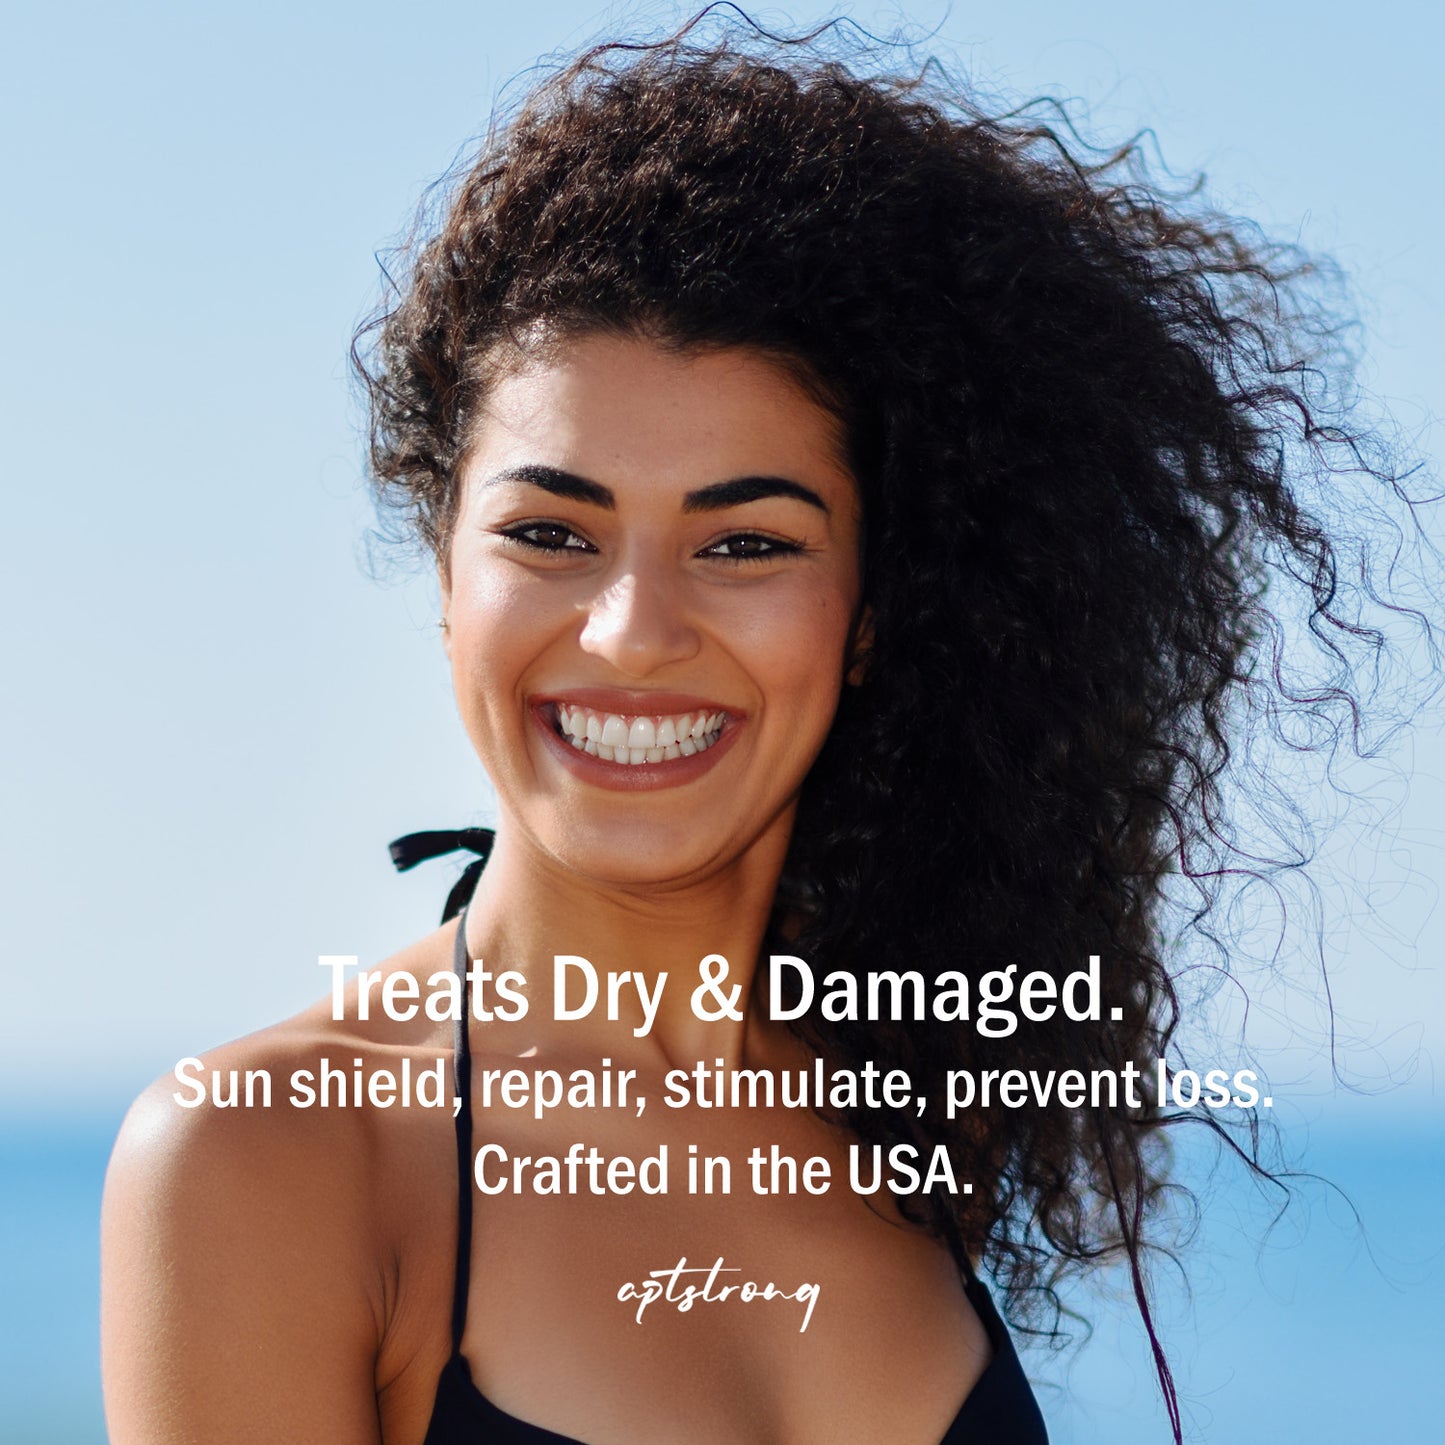 Enhance Well-Being: Address hair loss and promote scalp health by seamlessly incorporating it into your daily care.